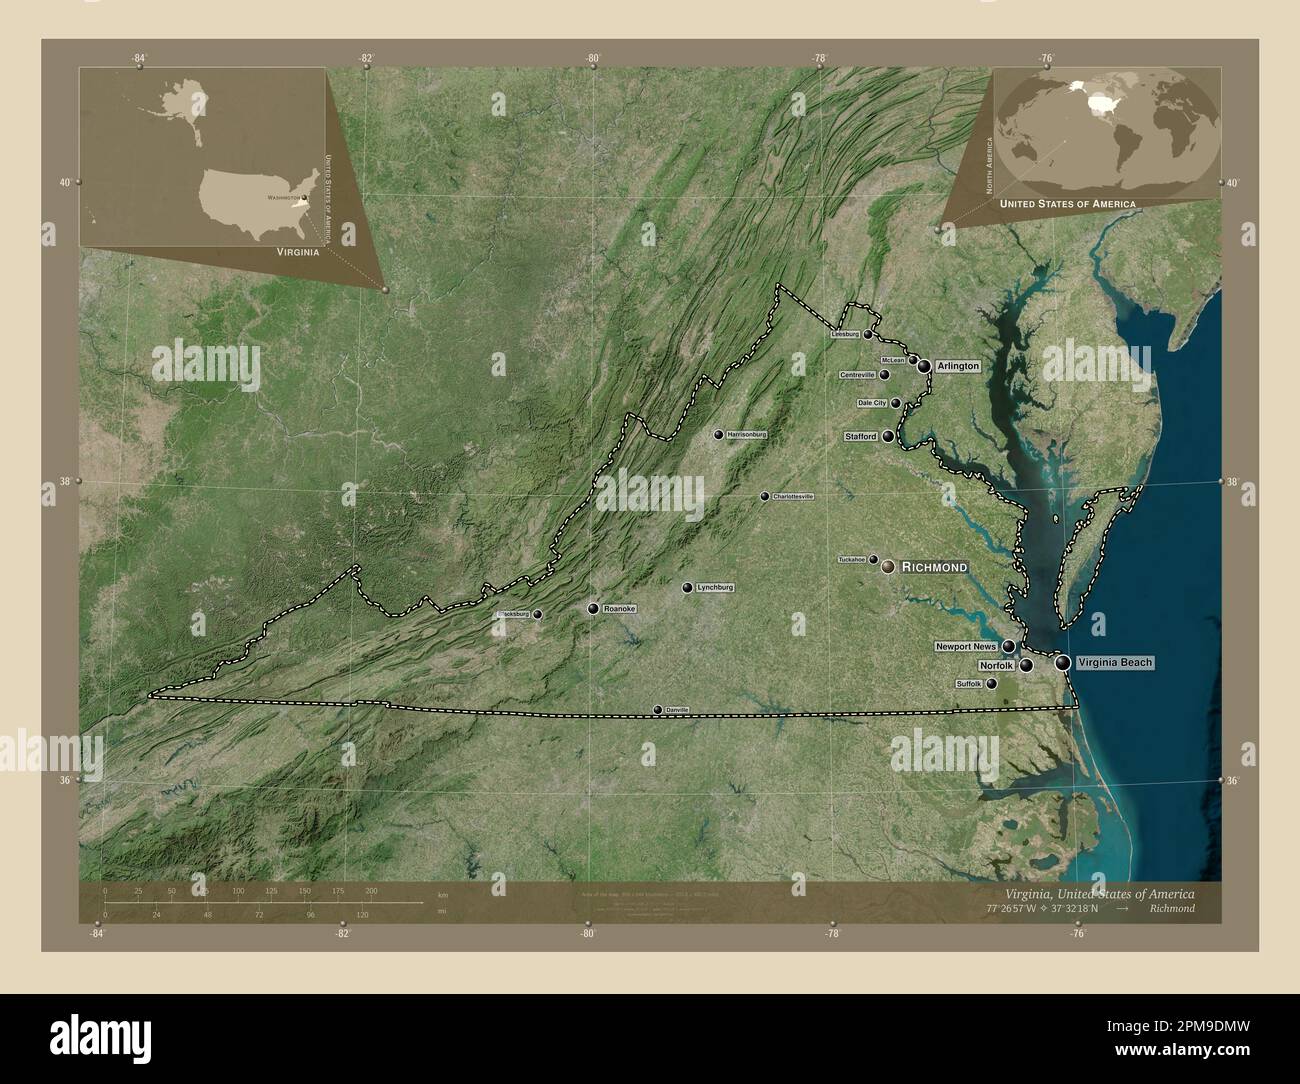 Virginia, state of United States of America. High resolution satellite map. Locations and names of major cities of the region. Corner auxiliary locati Stock Photo